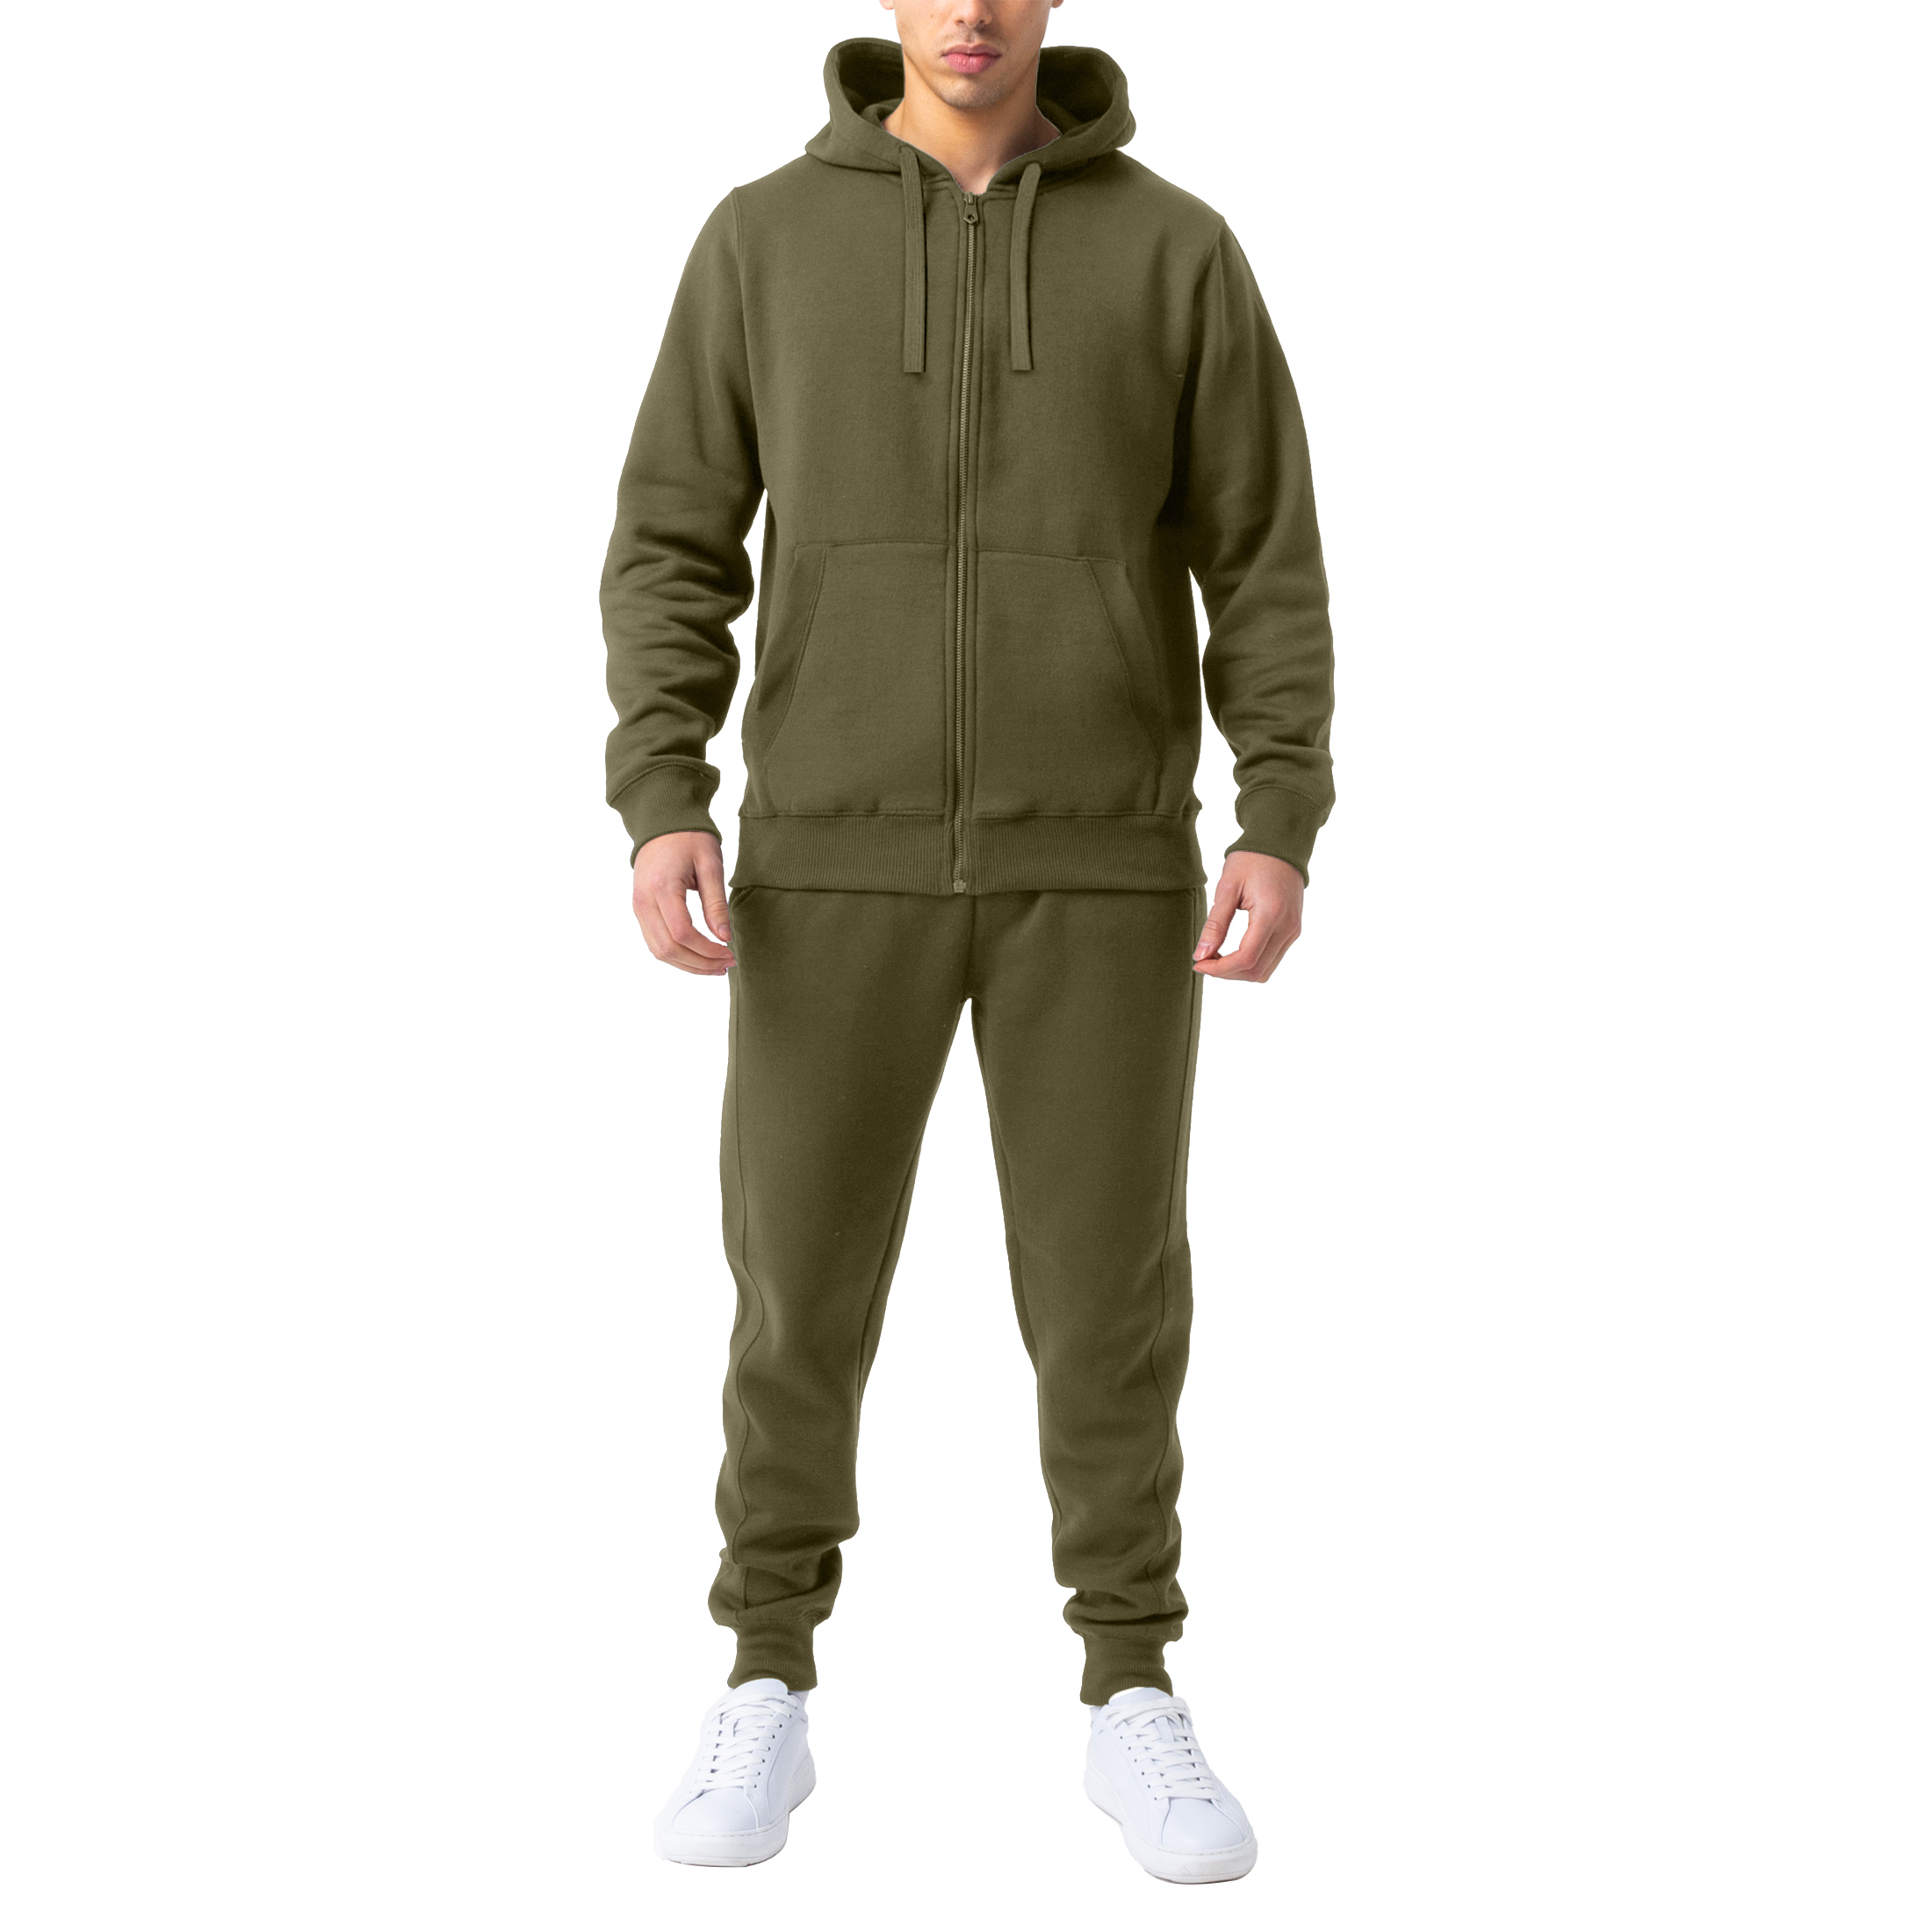 Men's Casual Jogging Athletic Active Full Zip Up Tracksuit - Olive, 4X-Large